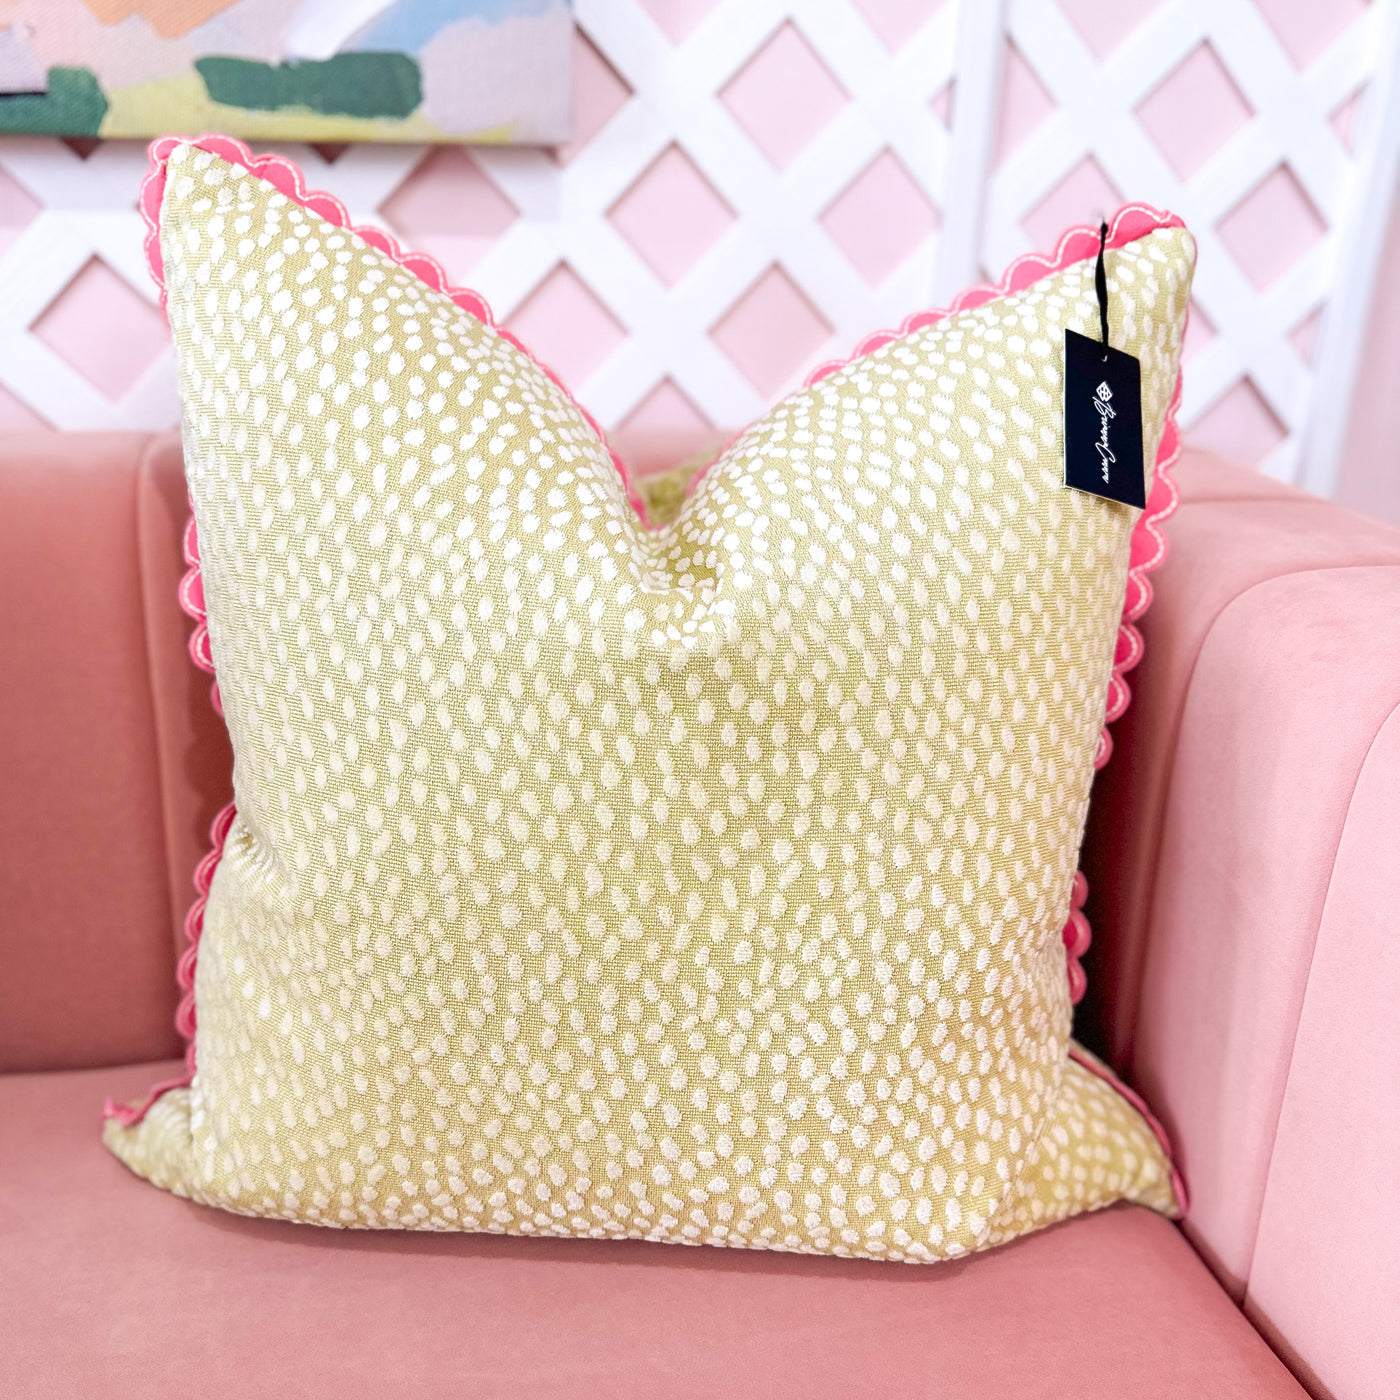 Thibaut Designer Pillow Cover - Spot On in Citron with Pink Pippa Trim